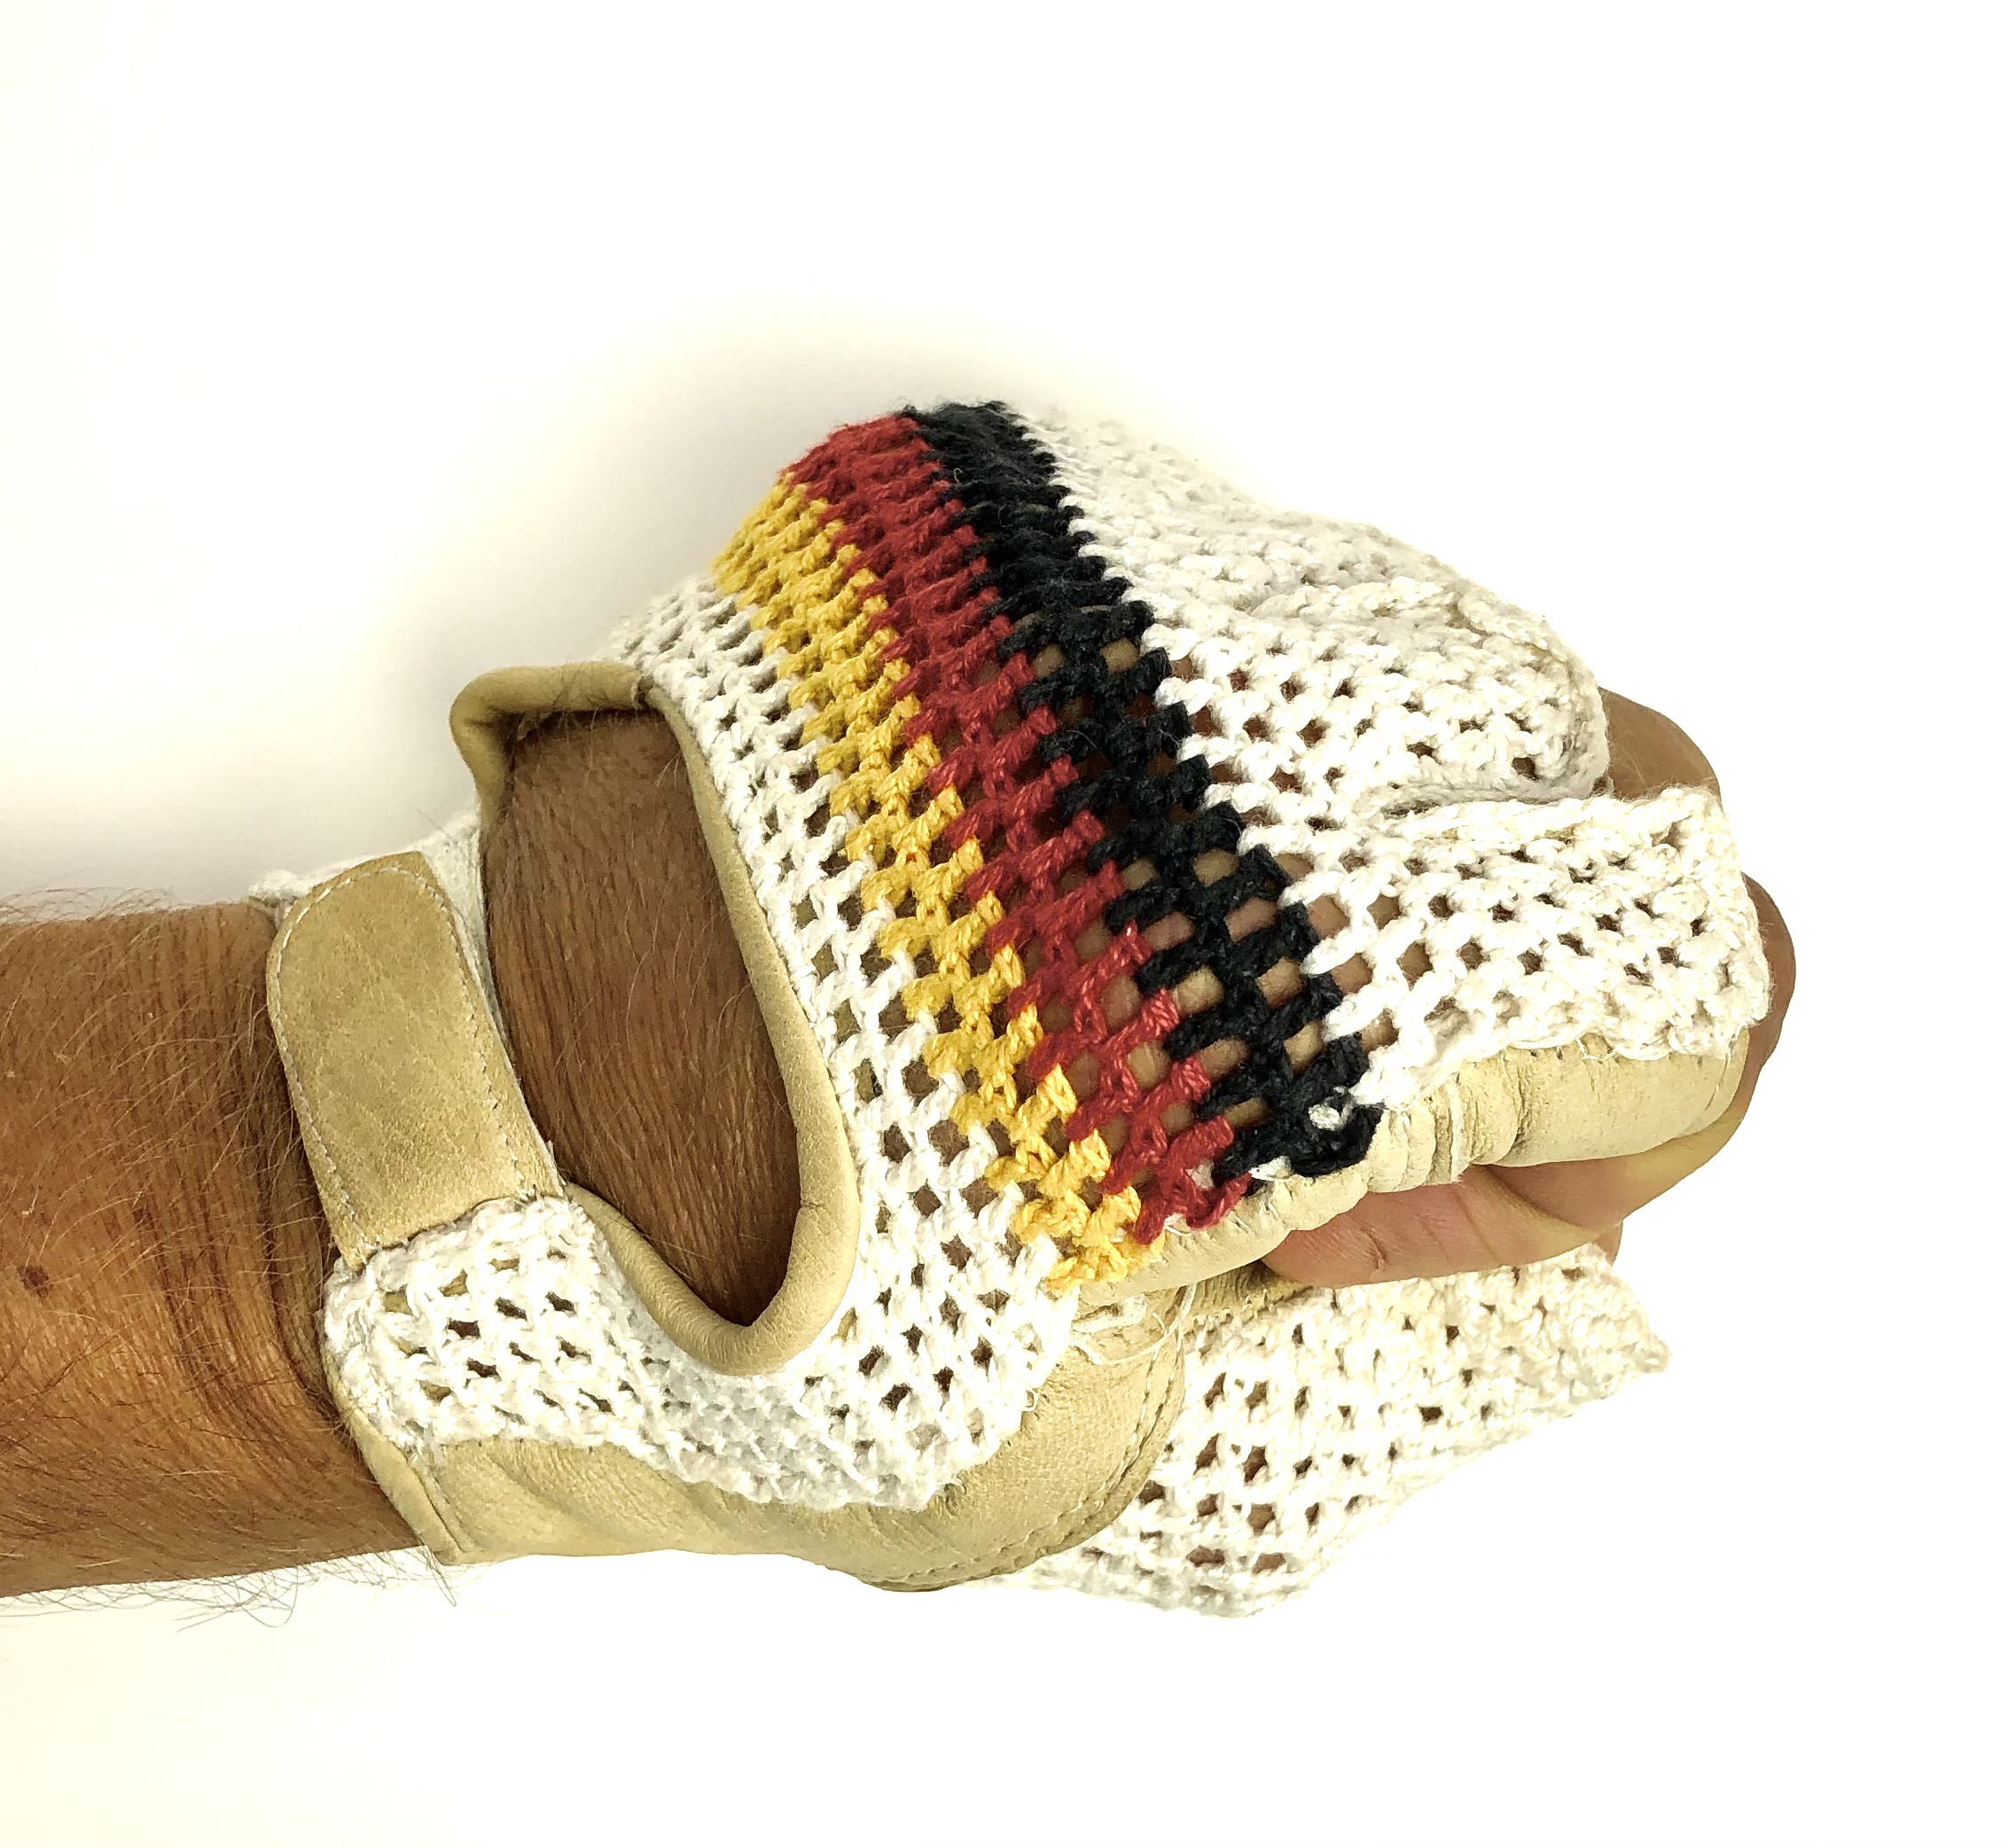 Original GANT 1970s vintage bicycle gloves with chrocheted upper hand Size 12